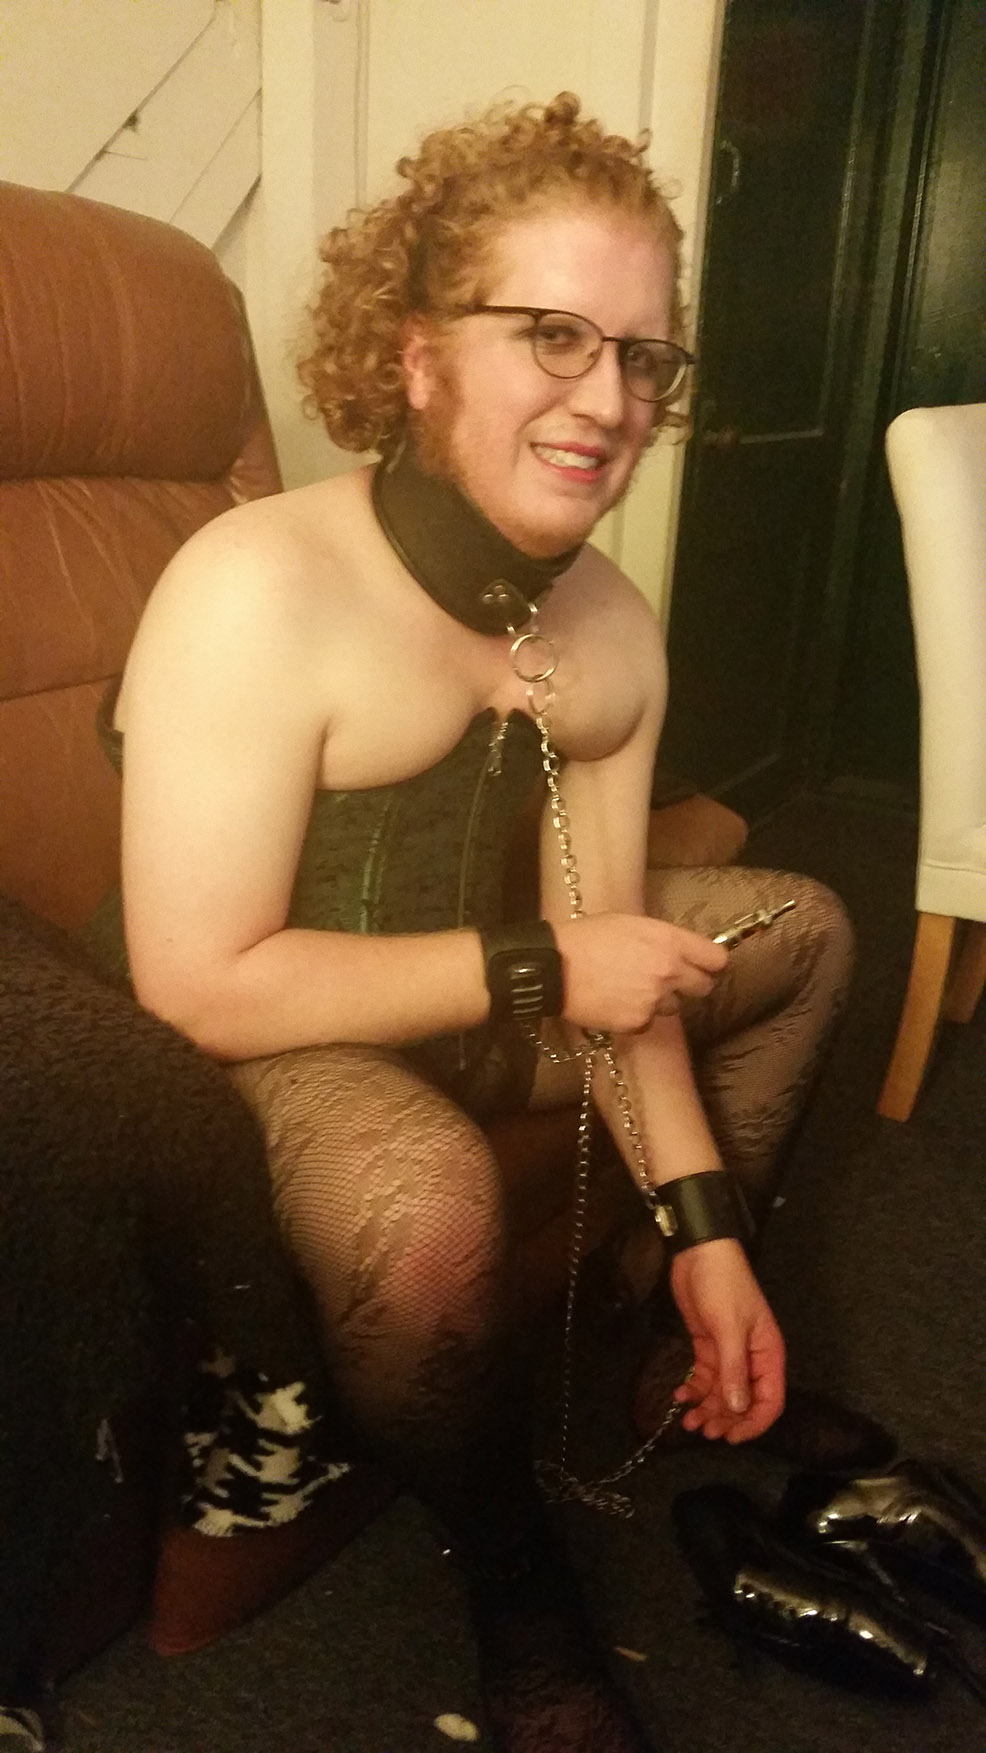 JT BIRD | Ginger fag craves humiliation and exposure!